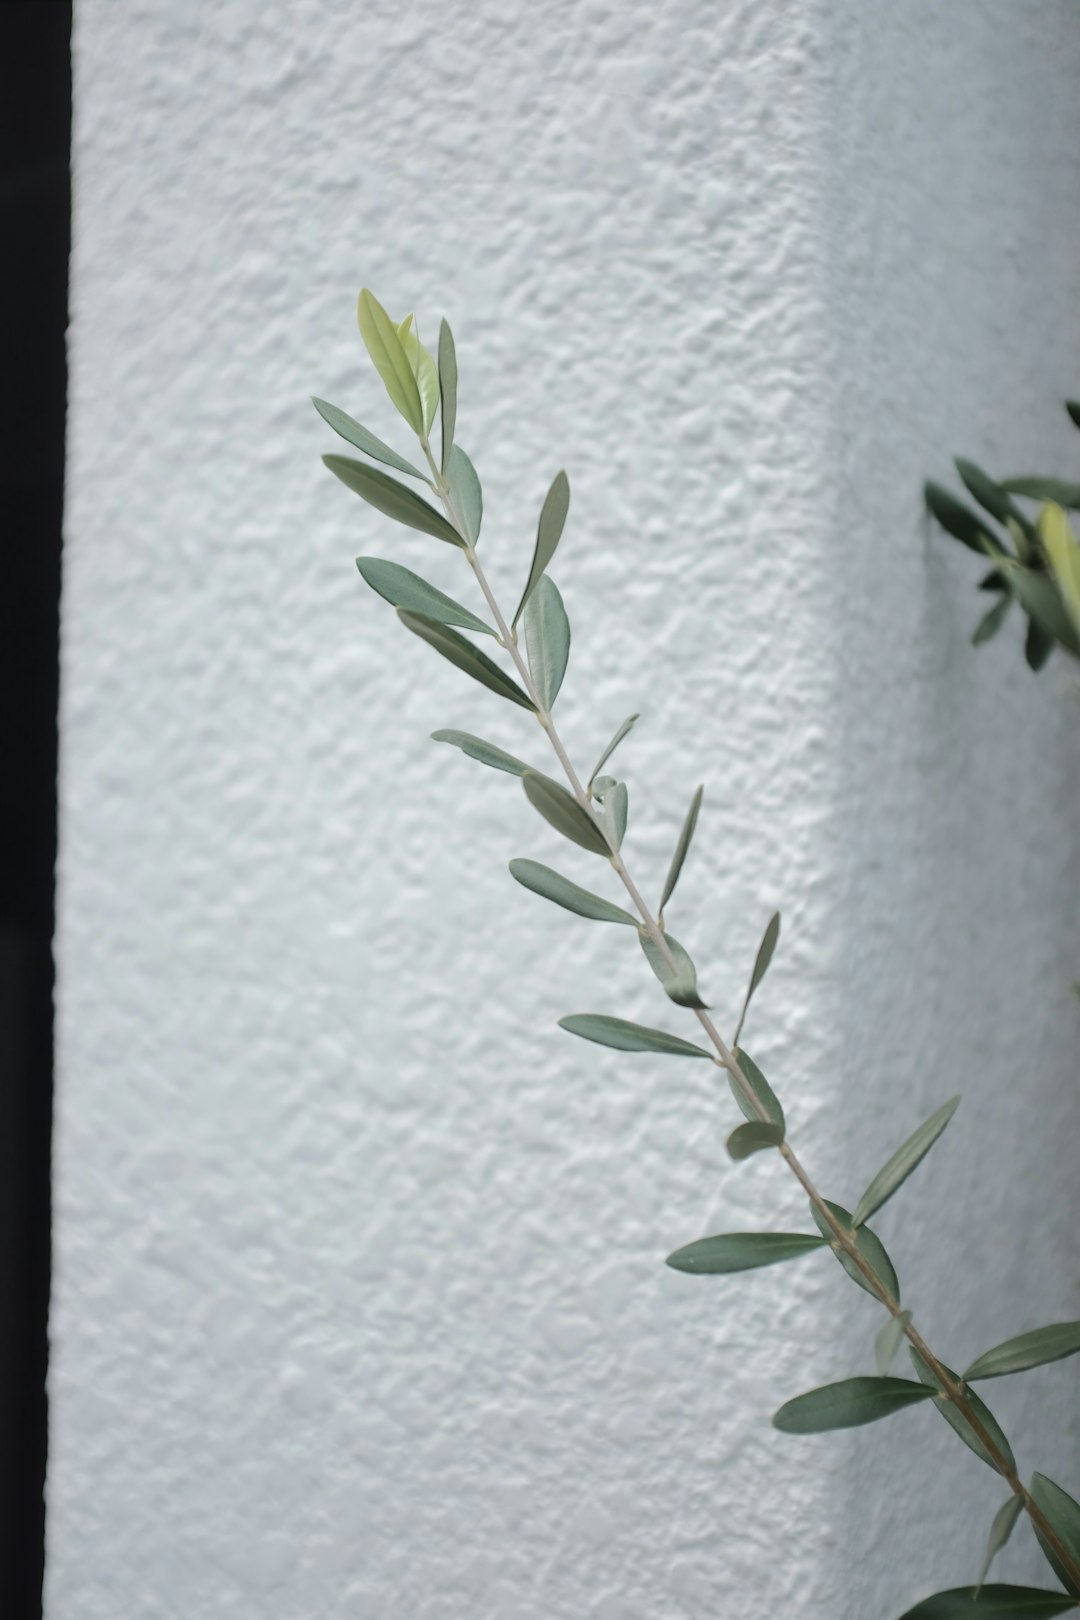 green plant on white wall